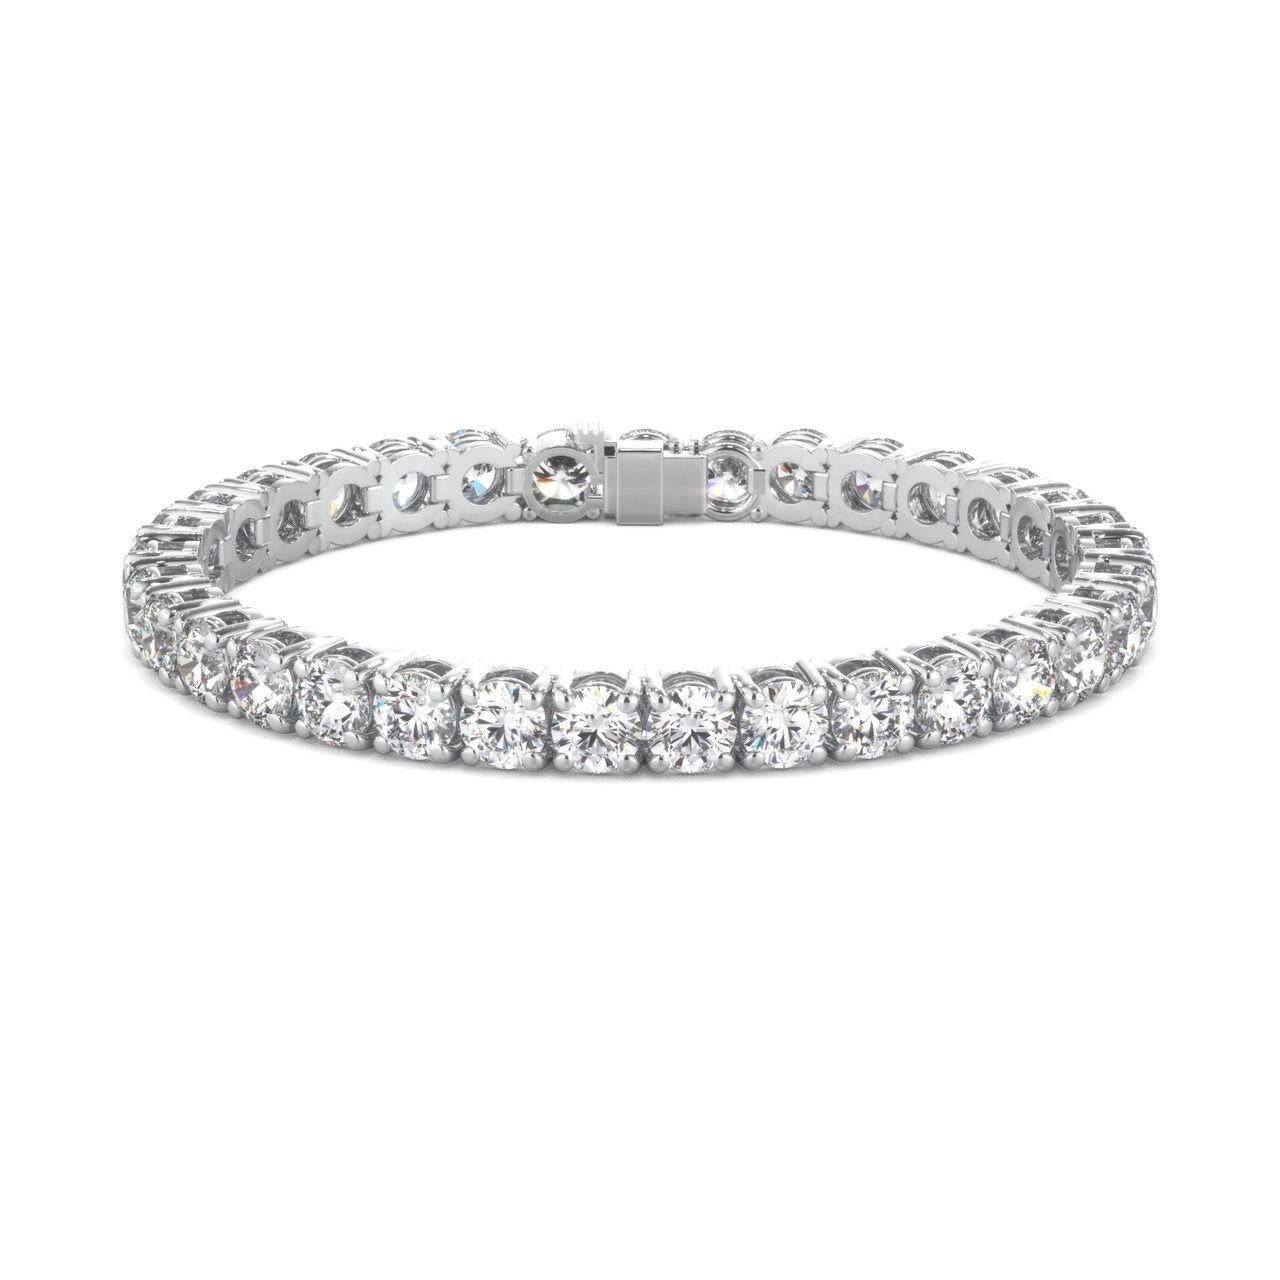 This marvelous diamond tennis bracelet has a pleasing 4 prong airline design. It also features round diamonds totaling 5.50 carats
F COLOR
VS1/VS2 CLARITY